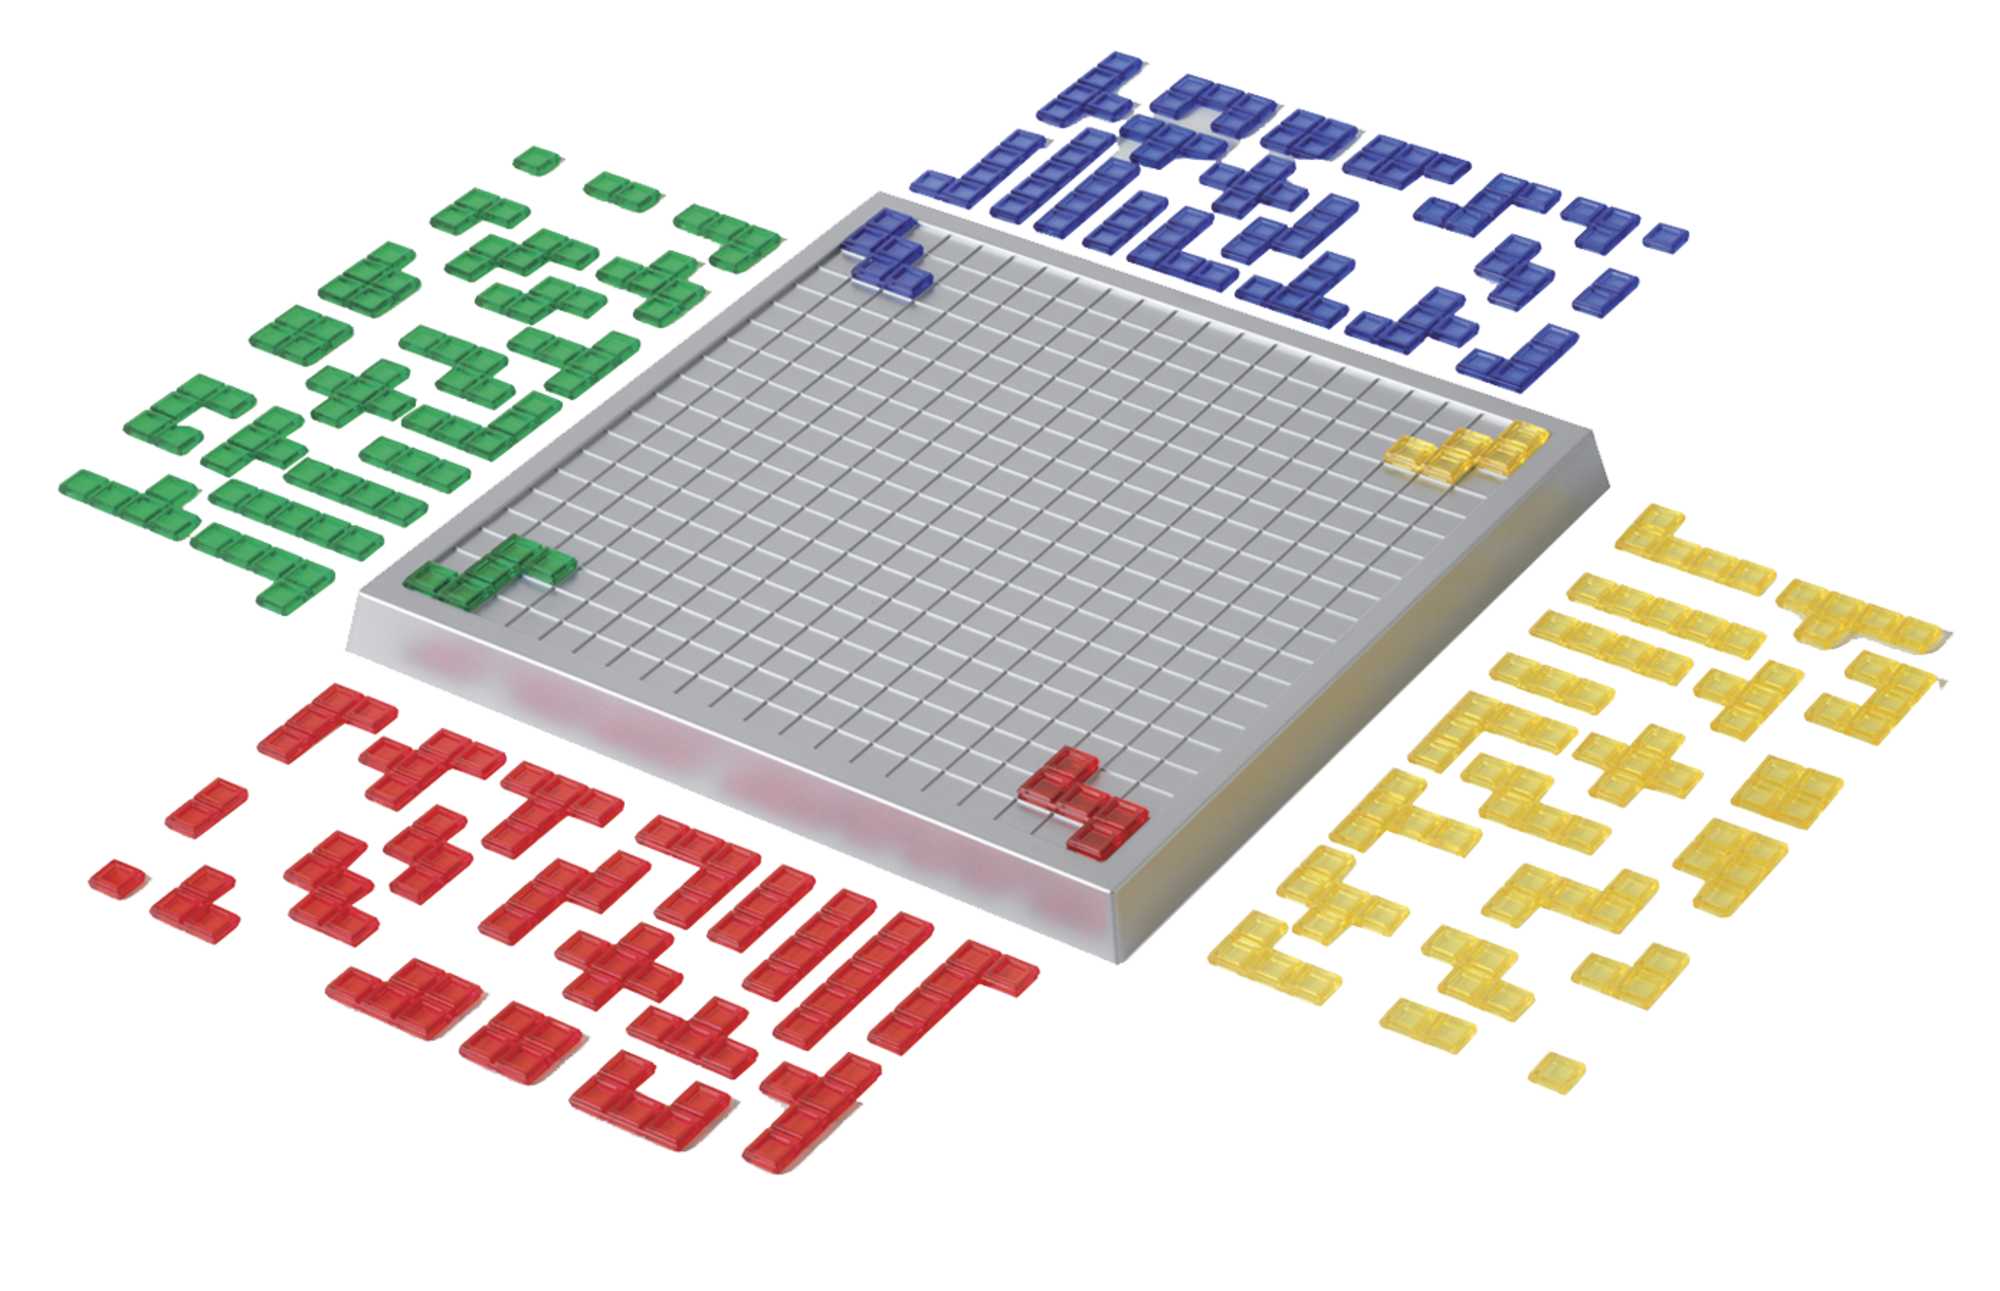 Blokus XL Family Board Games, Brain Games with Large Board and Pieces - image 3 of 6